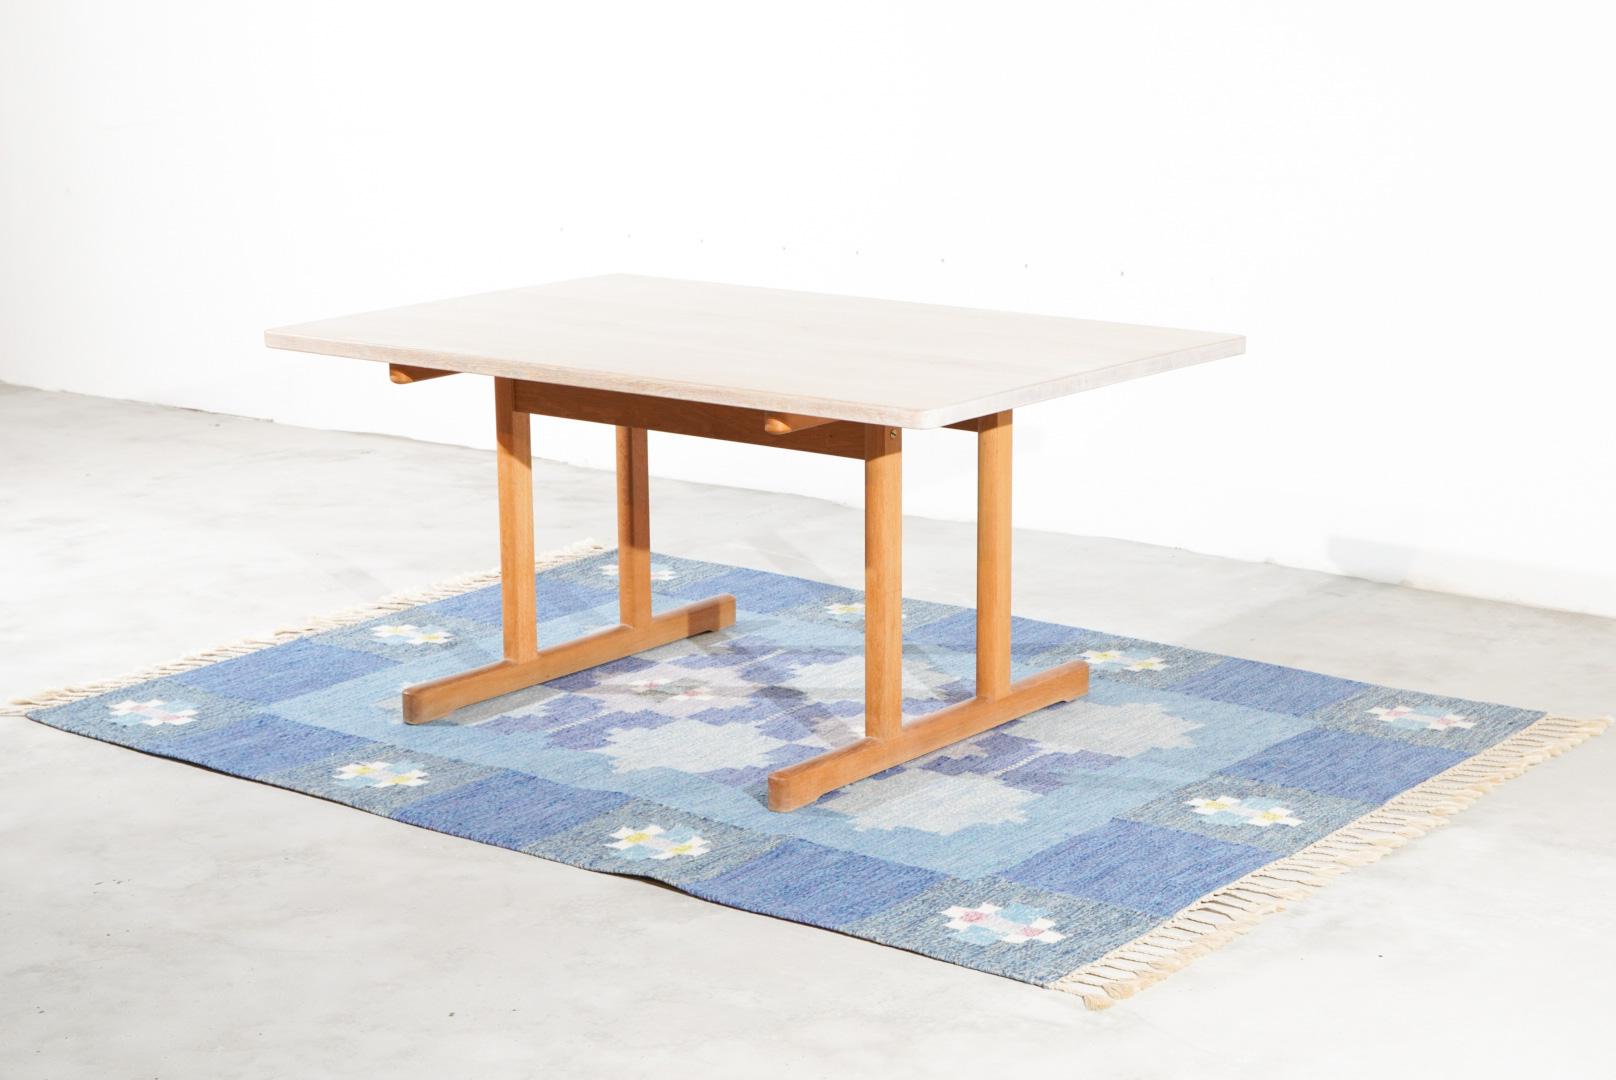 Børge Mogensen shaker dining table in solid soap / pigmented oak. Made by Fredericia Furniture, model 6289.